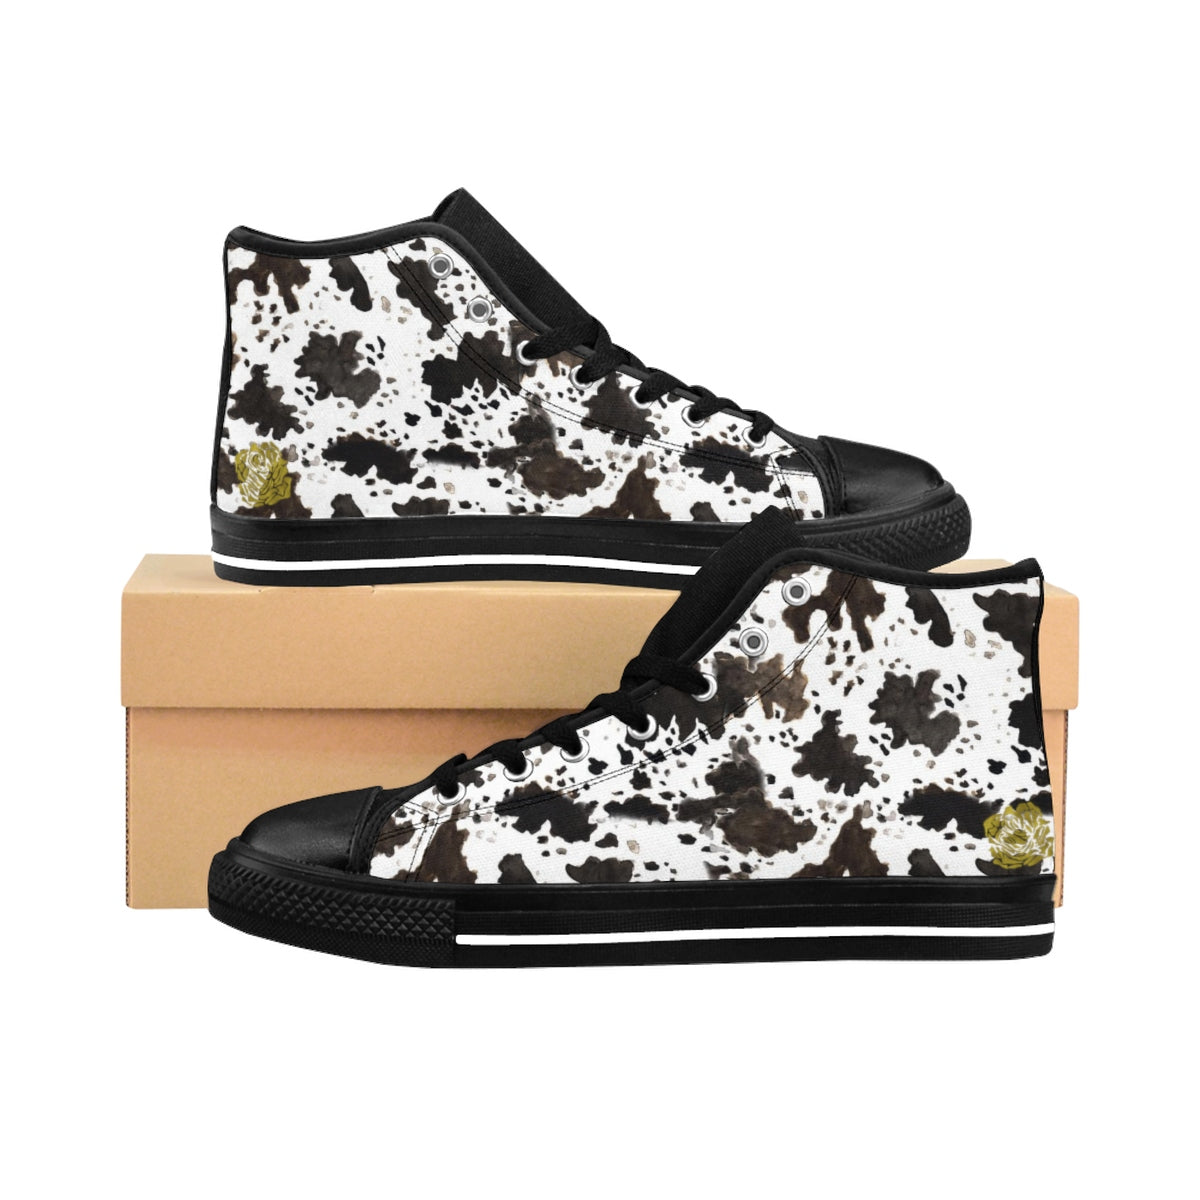 Farm Cow Print Black White Brown High Performance Women's High-Top Sneakers Shoes, (US Size: 6-12)-Women's High Top Sneakers-Black-US 9-Heidi Kimura Art LLC